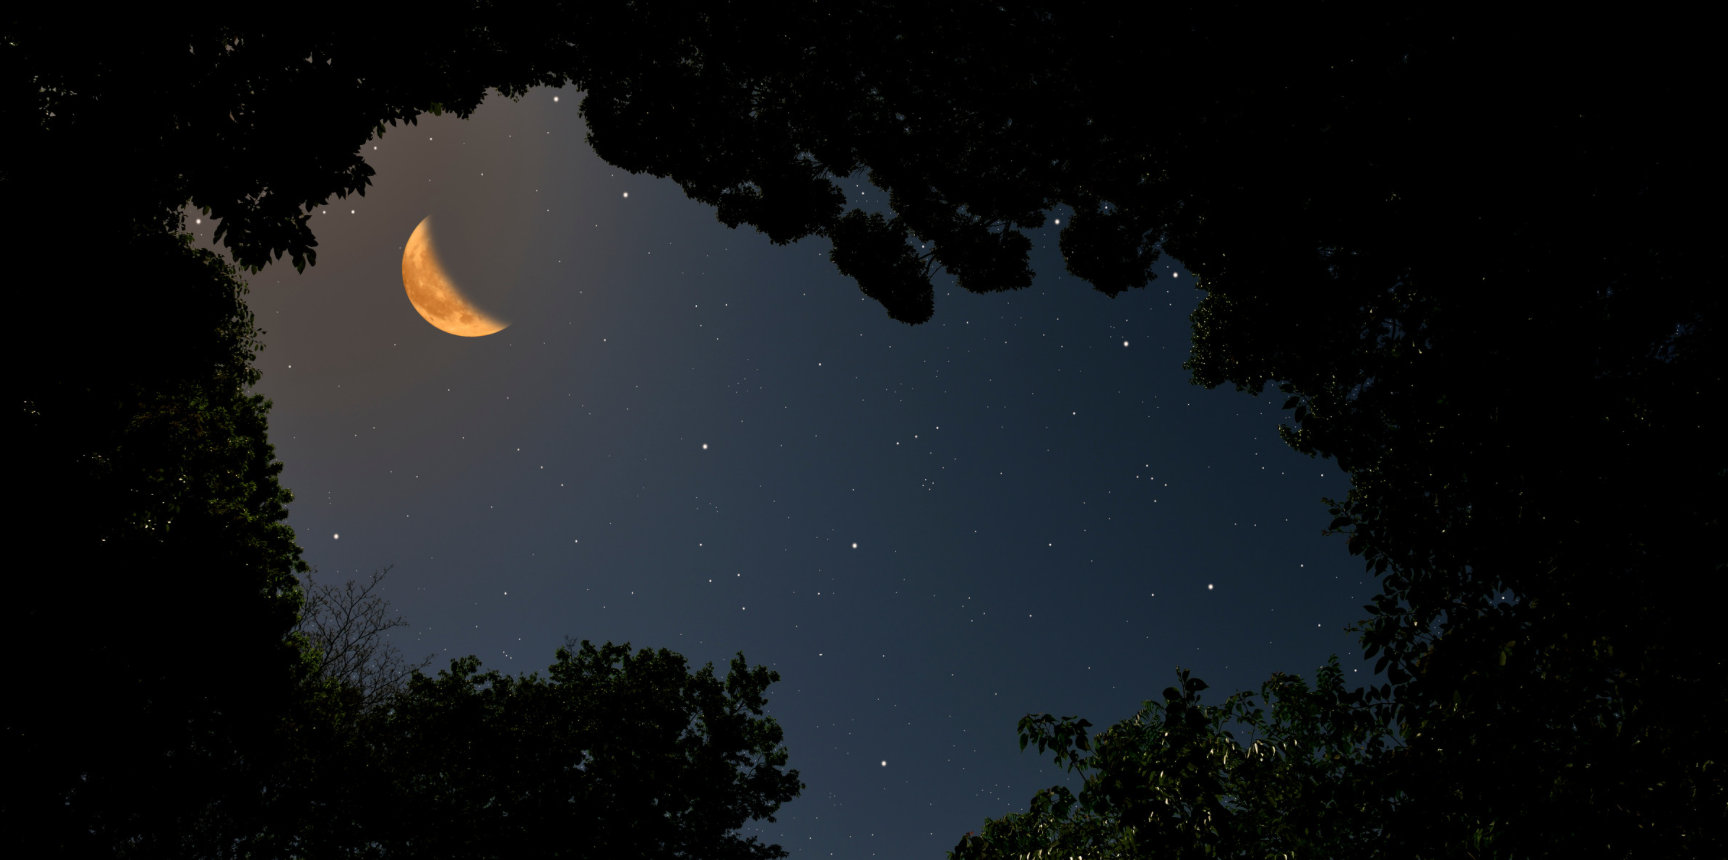 Looking up through a canopy of trees to a bright crescent moon in the night sky